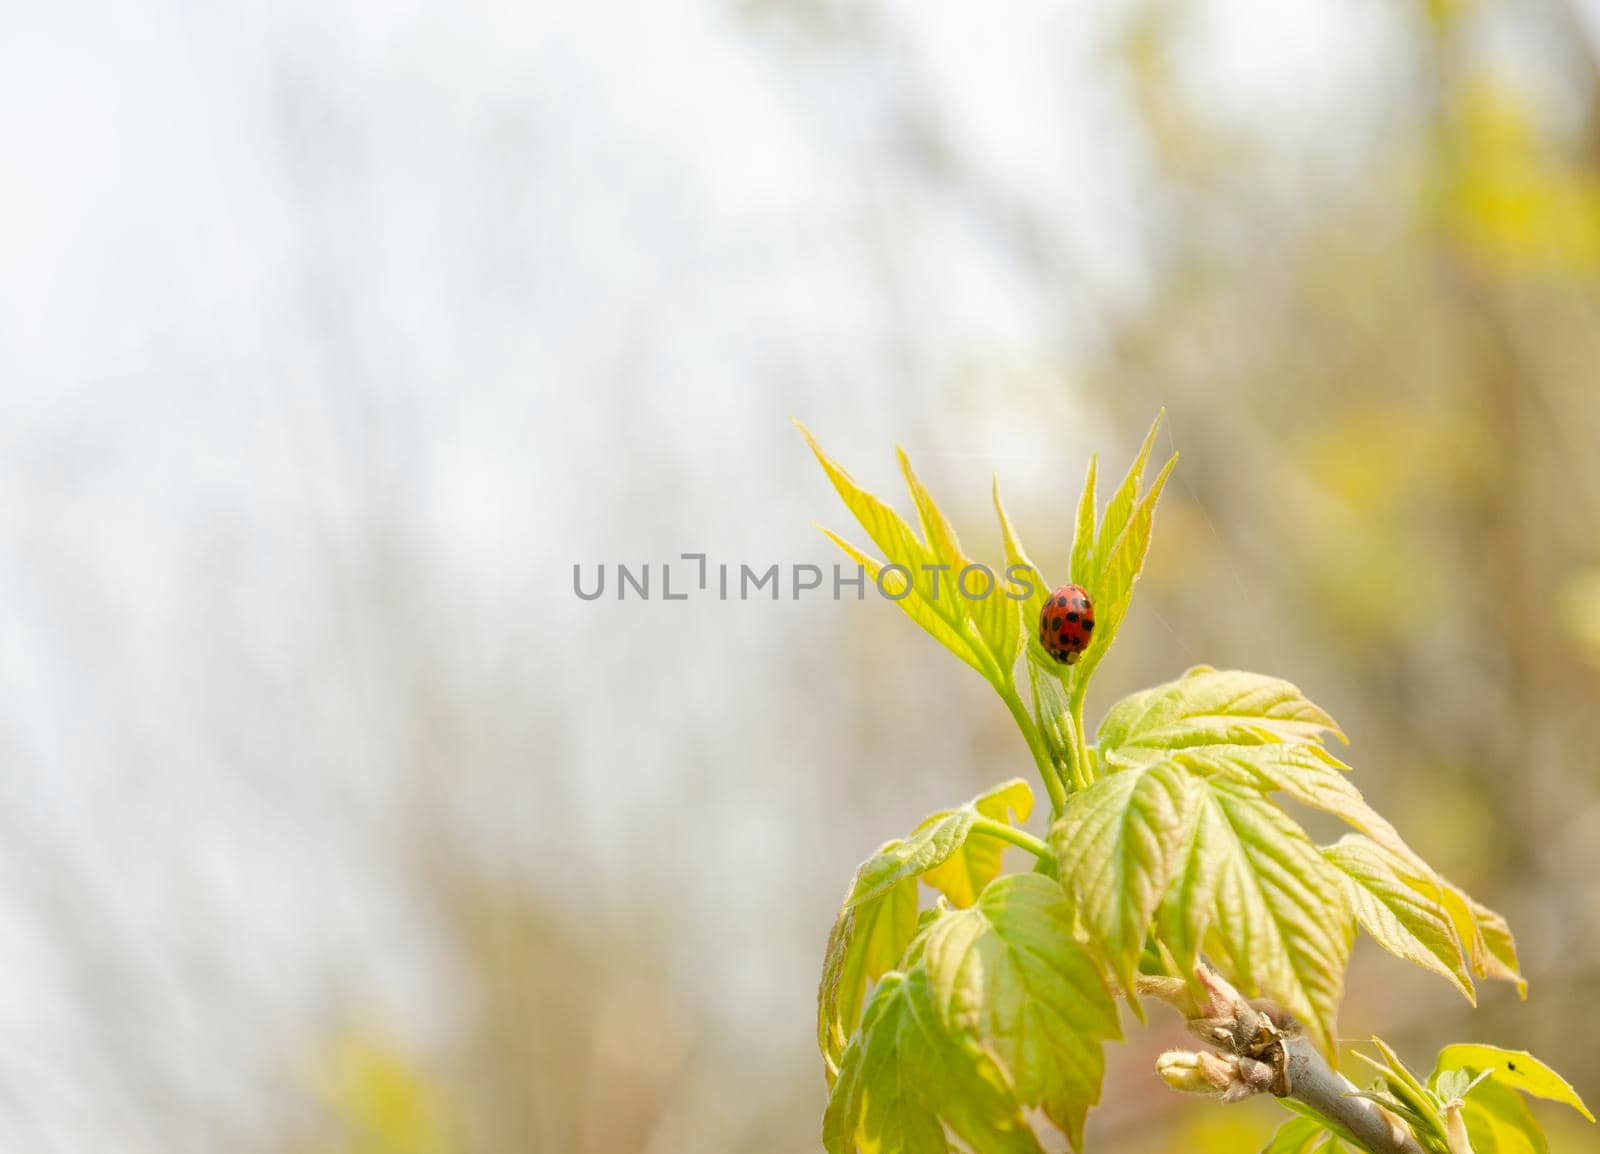 Ladybug on a leaf of a branch on a blurred light autumn background by mtx